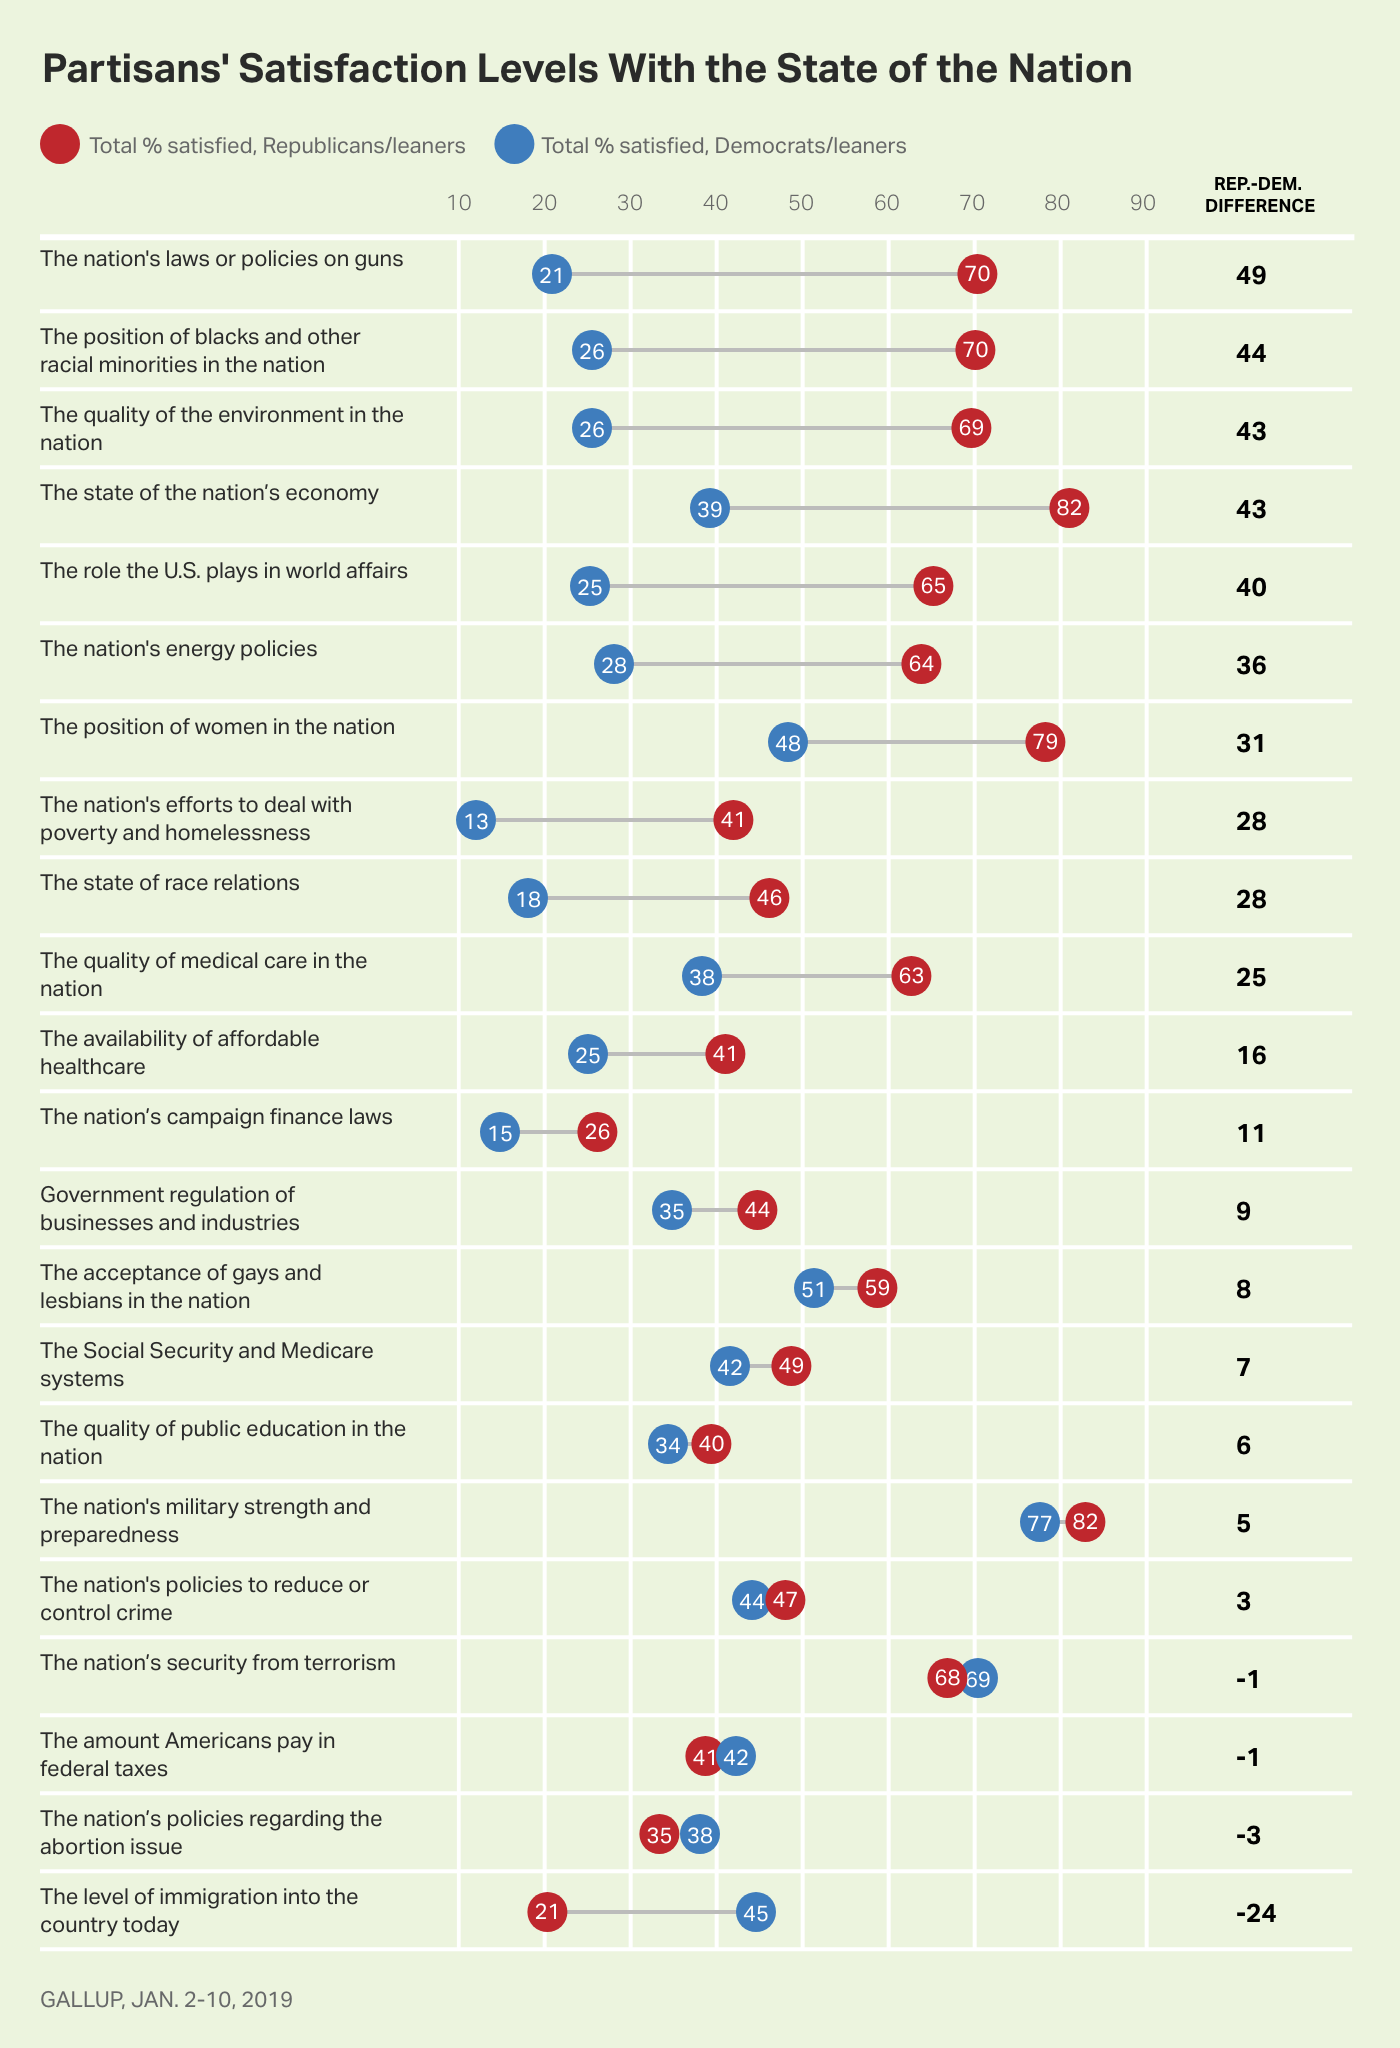 Graph. Ranking of differences in satisfaction levels of Republicans and Democrats on 22 issues. Gun policy is largest.